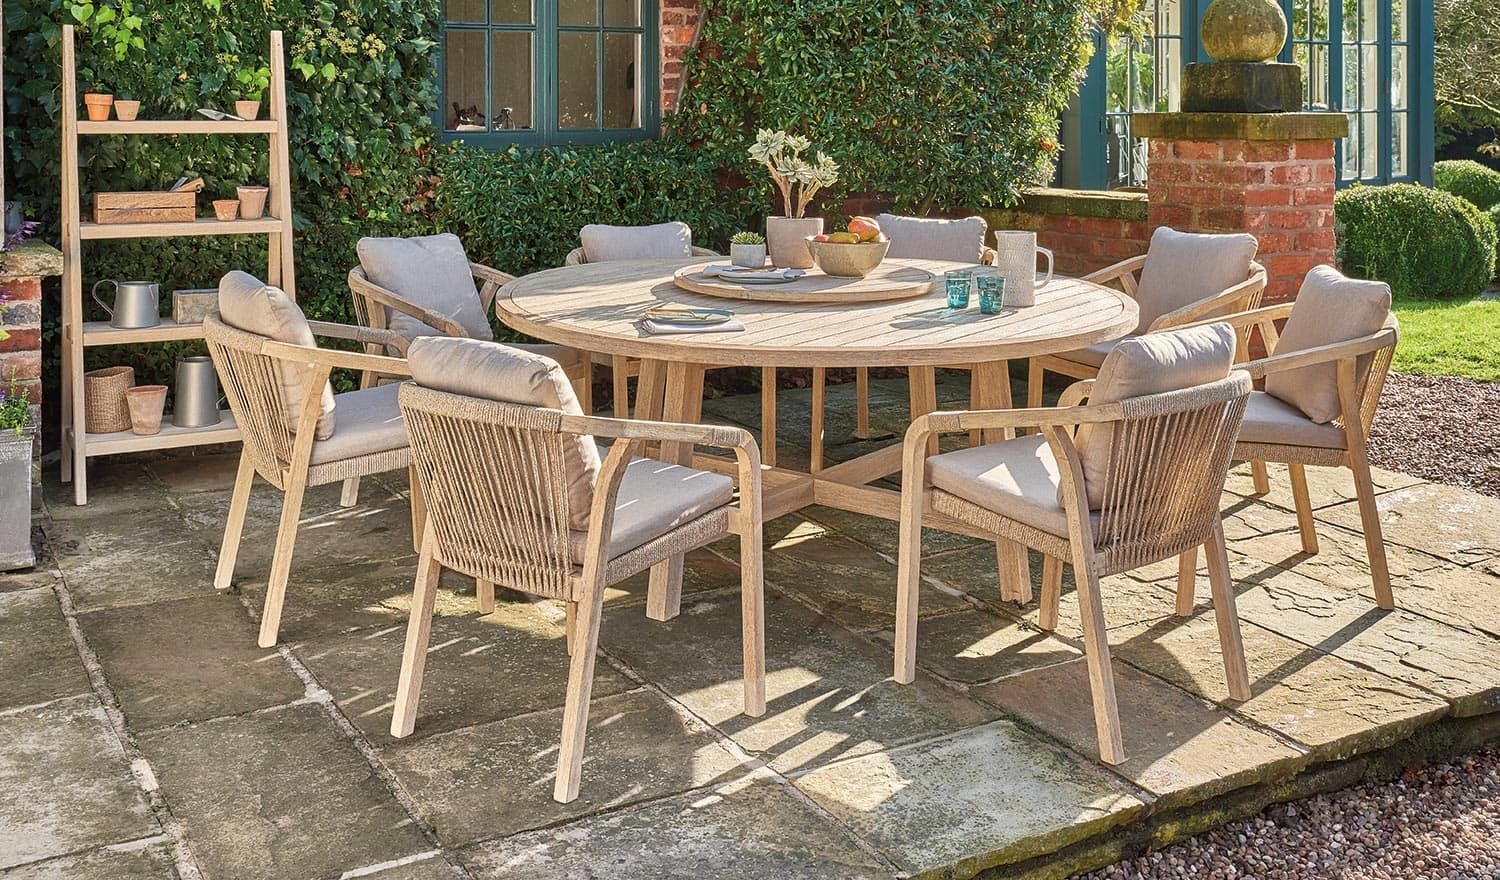 cora 180cm round dining table 8 seater